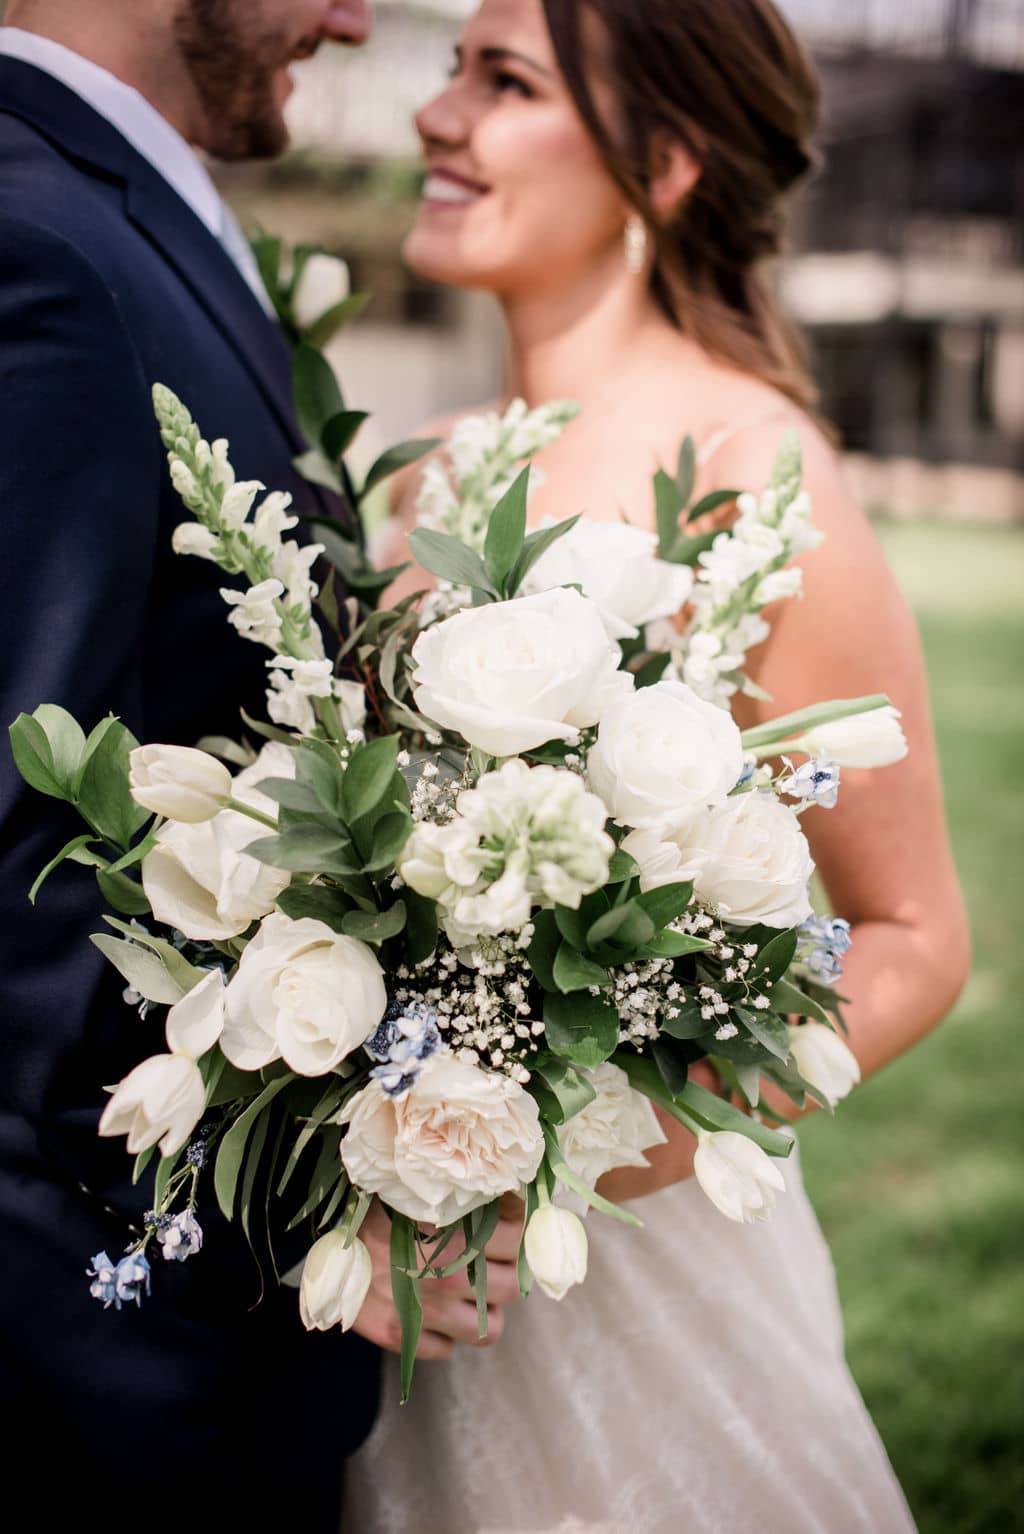 in learning how to plan a wedding in bryan college texas, the bride and groom opted for a bouquet of white mixed flowers